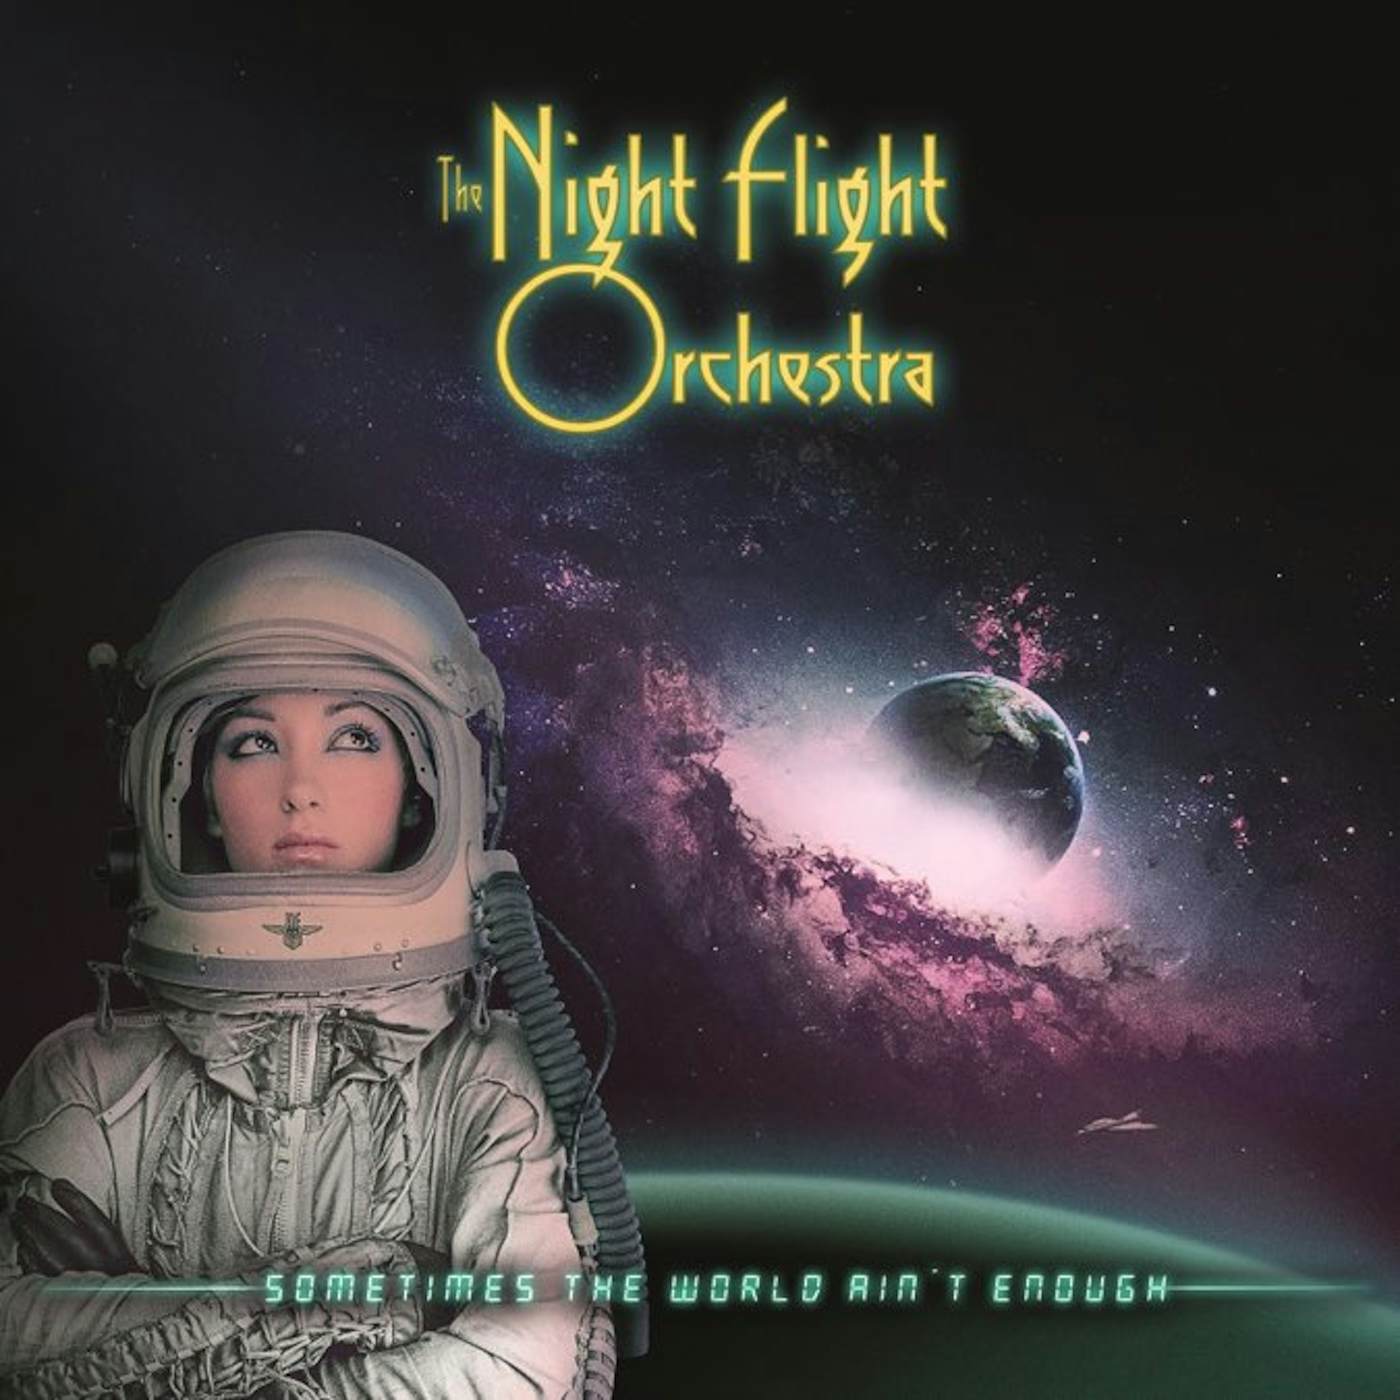 The Night Flight Orchestra SOMETIMES THE WORLD AIN'T ENOUGH CD